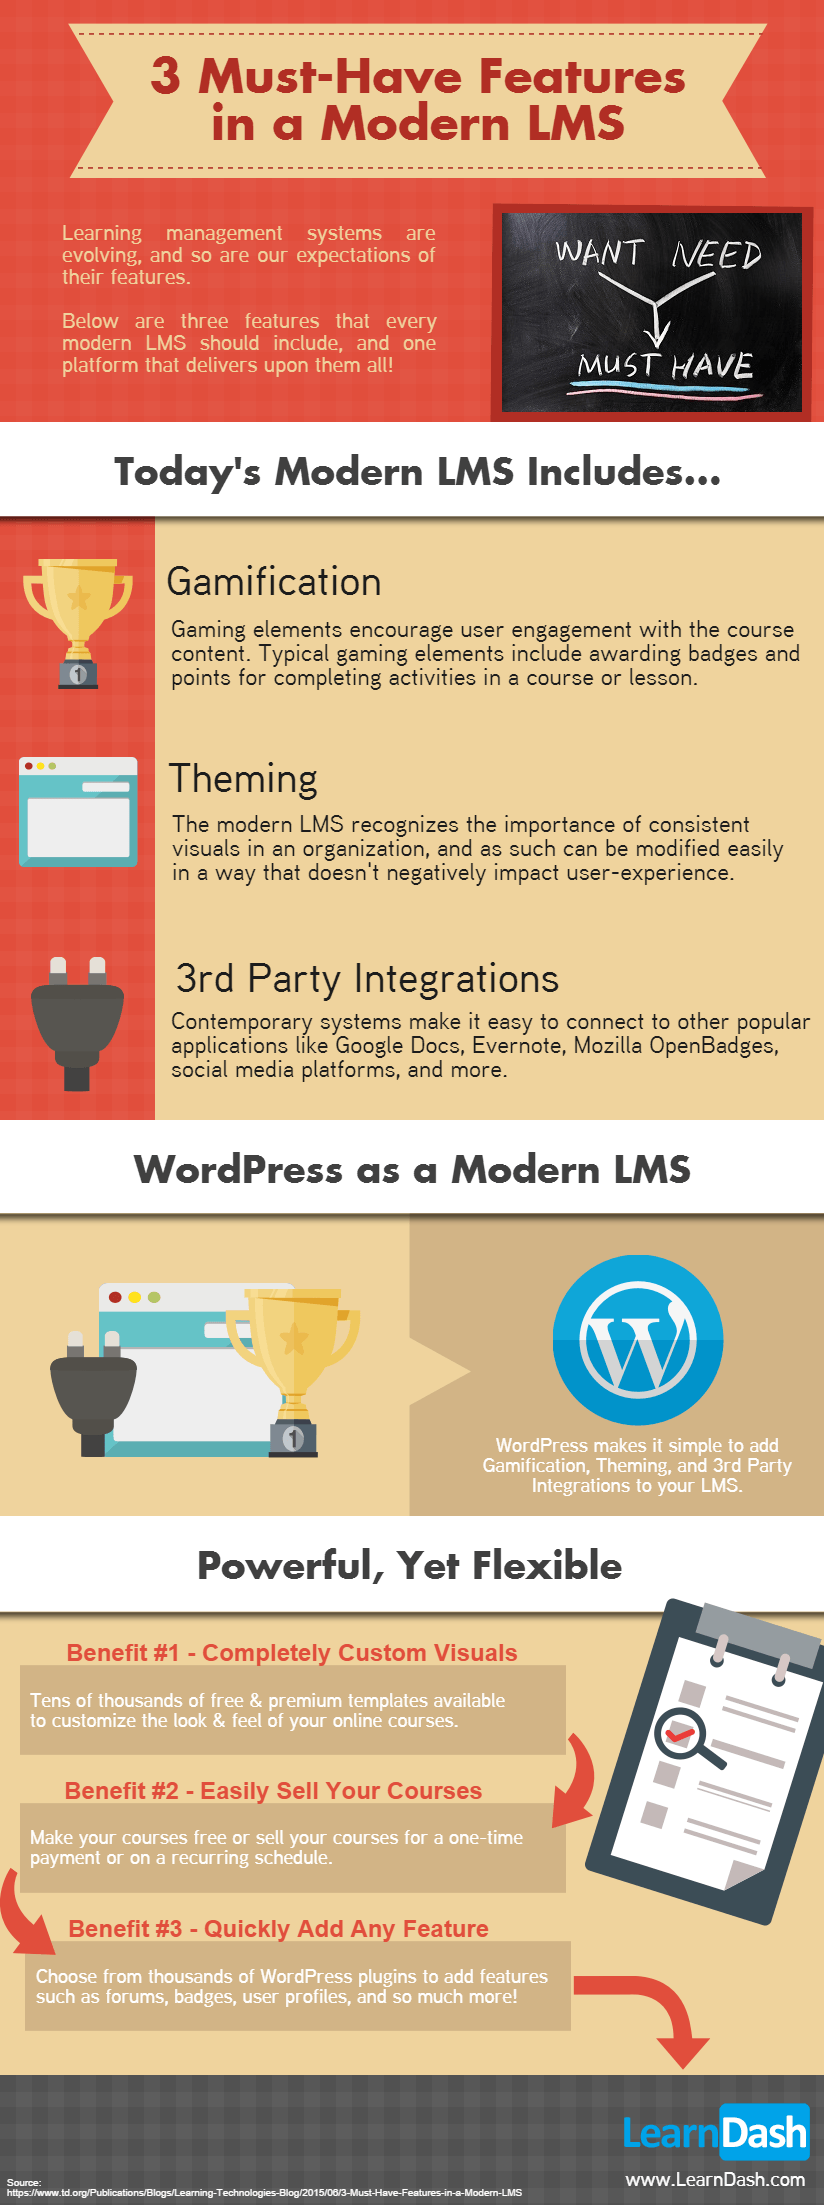 3 Must-Have Features in a Modern LMS Infographic